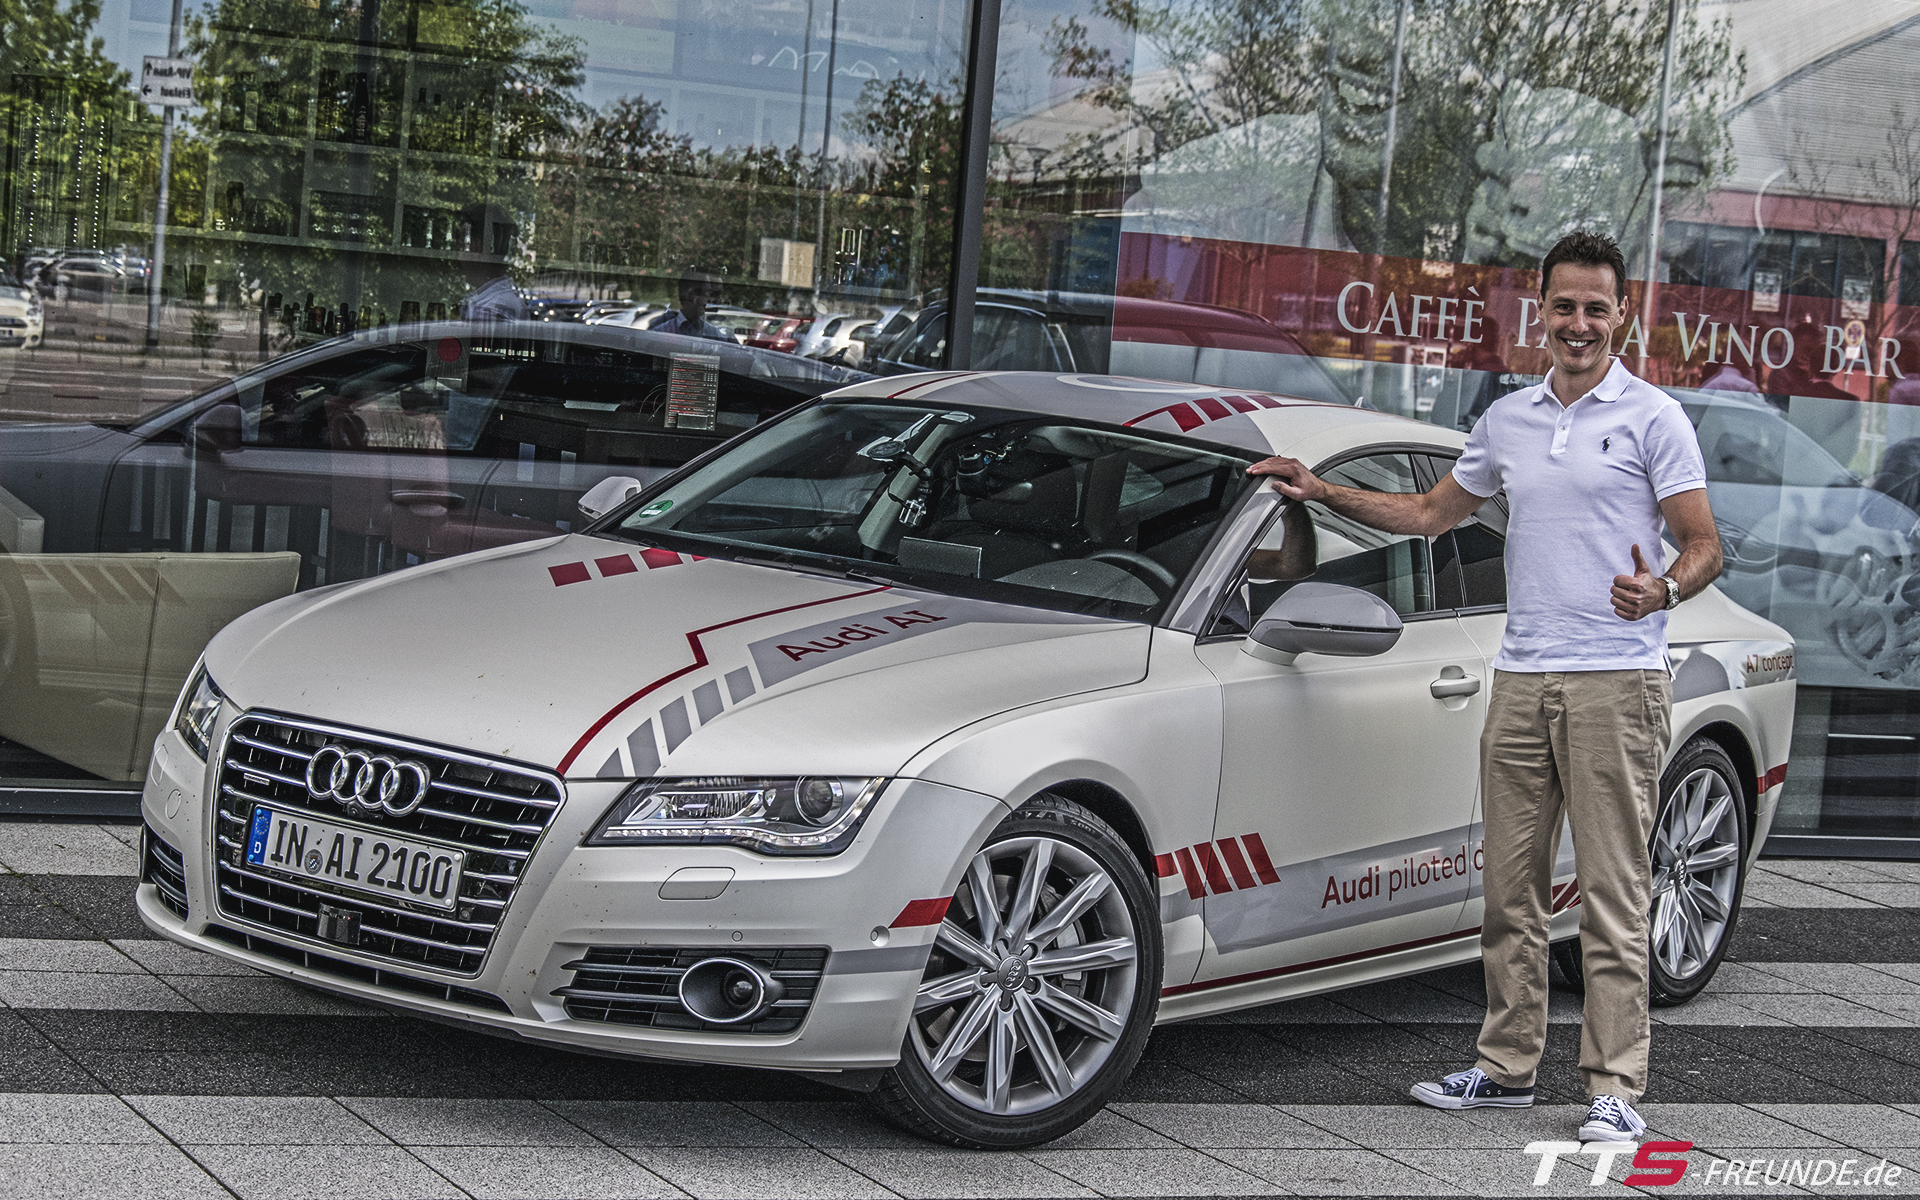 Audi Piloted Driving